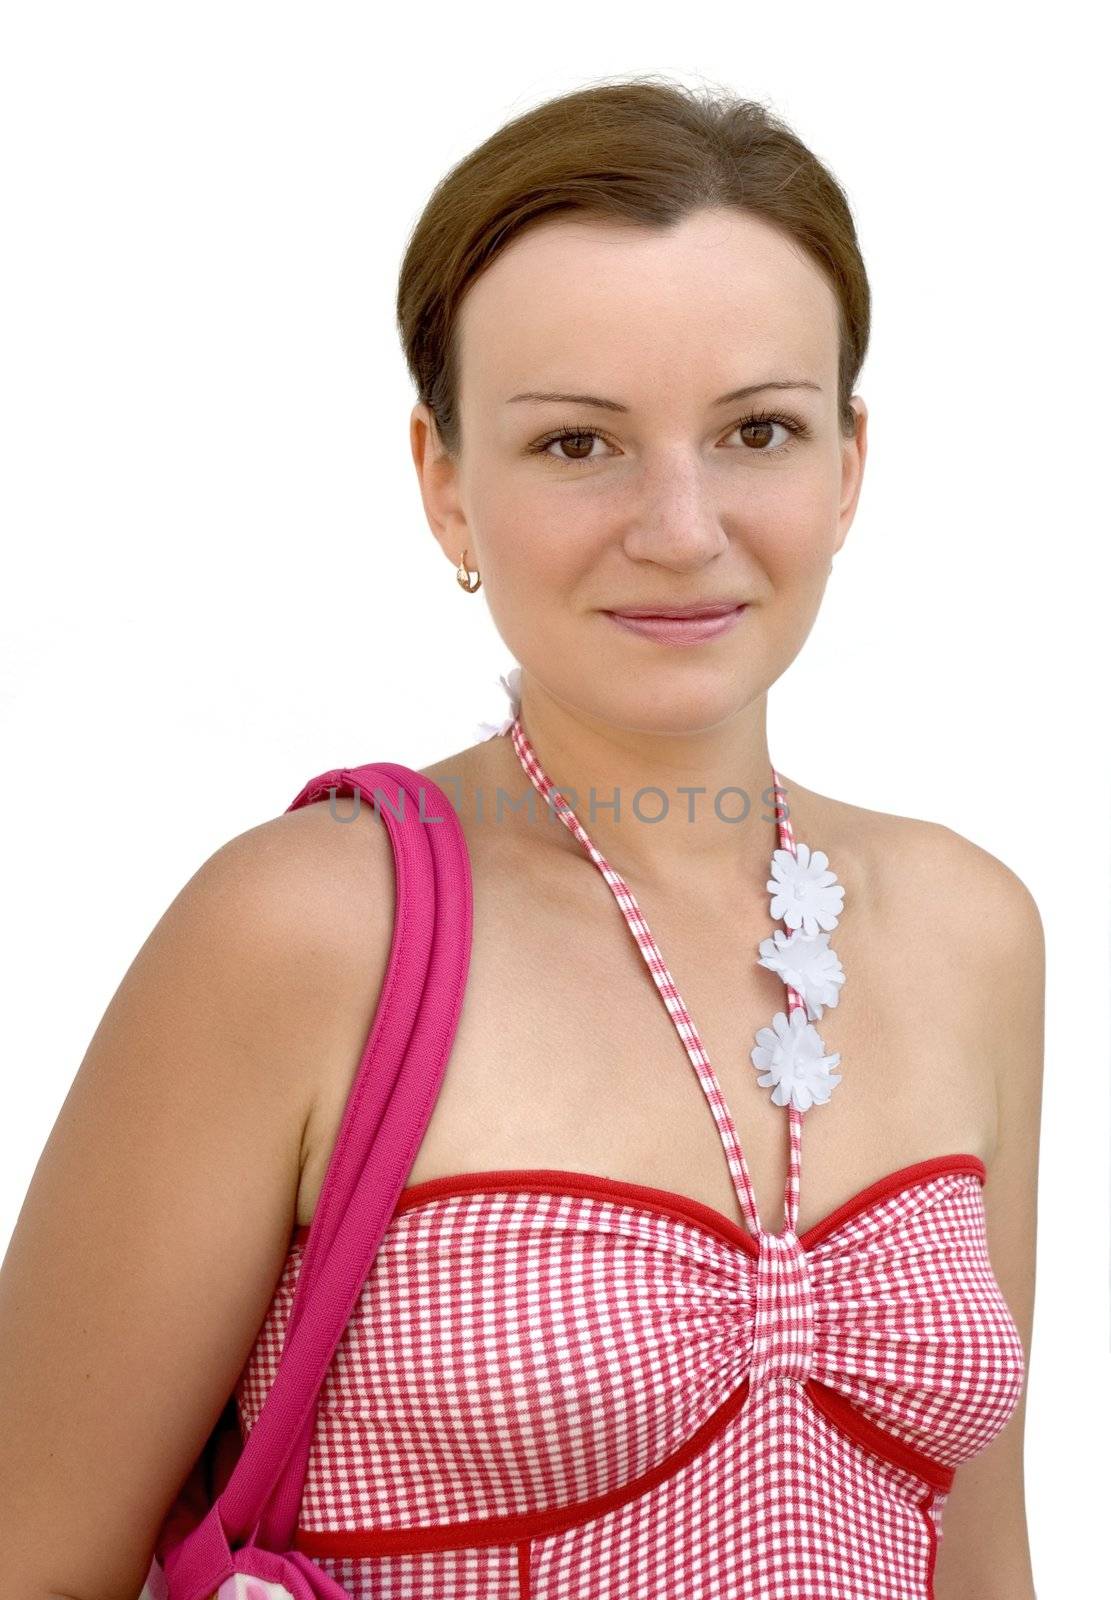 The sunburnt woman in a red sundress (it is isolated on a white background)